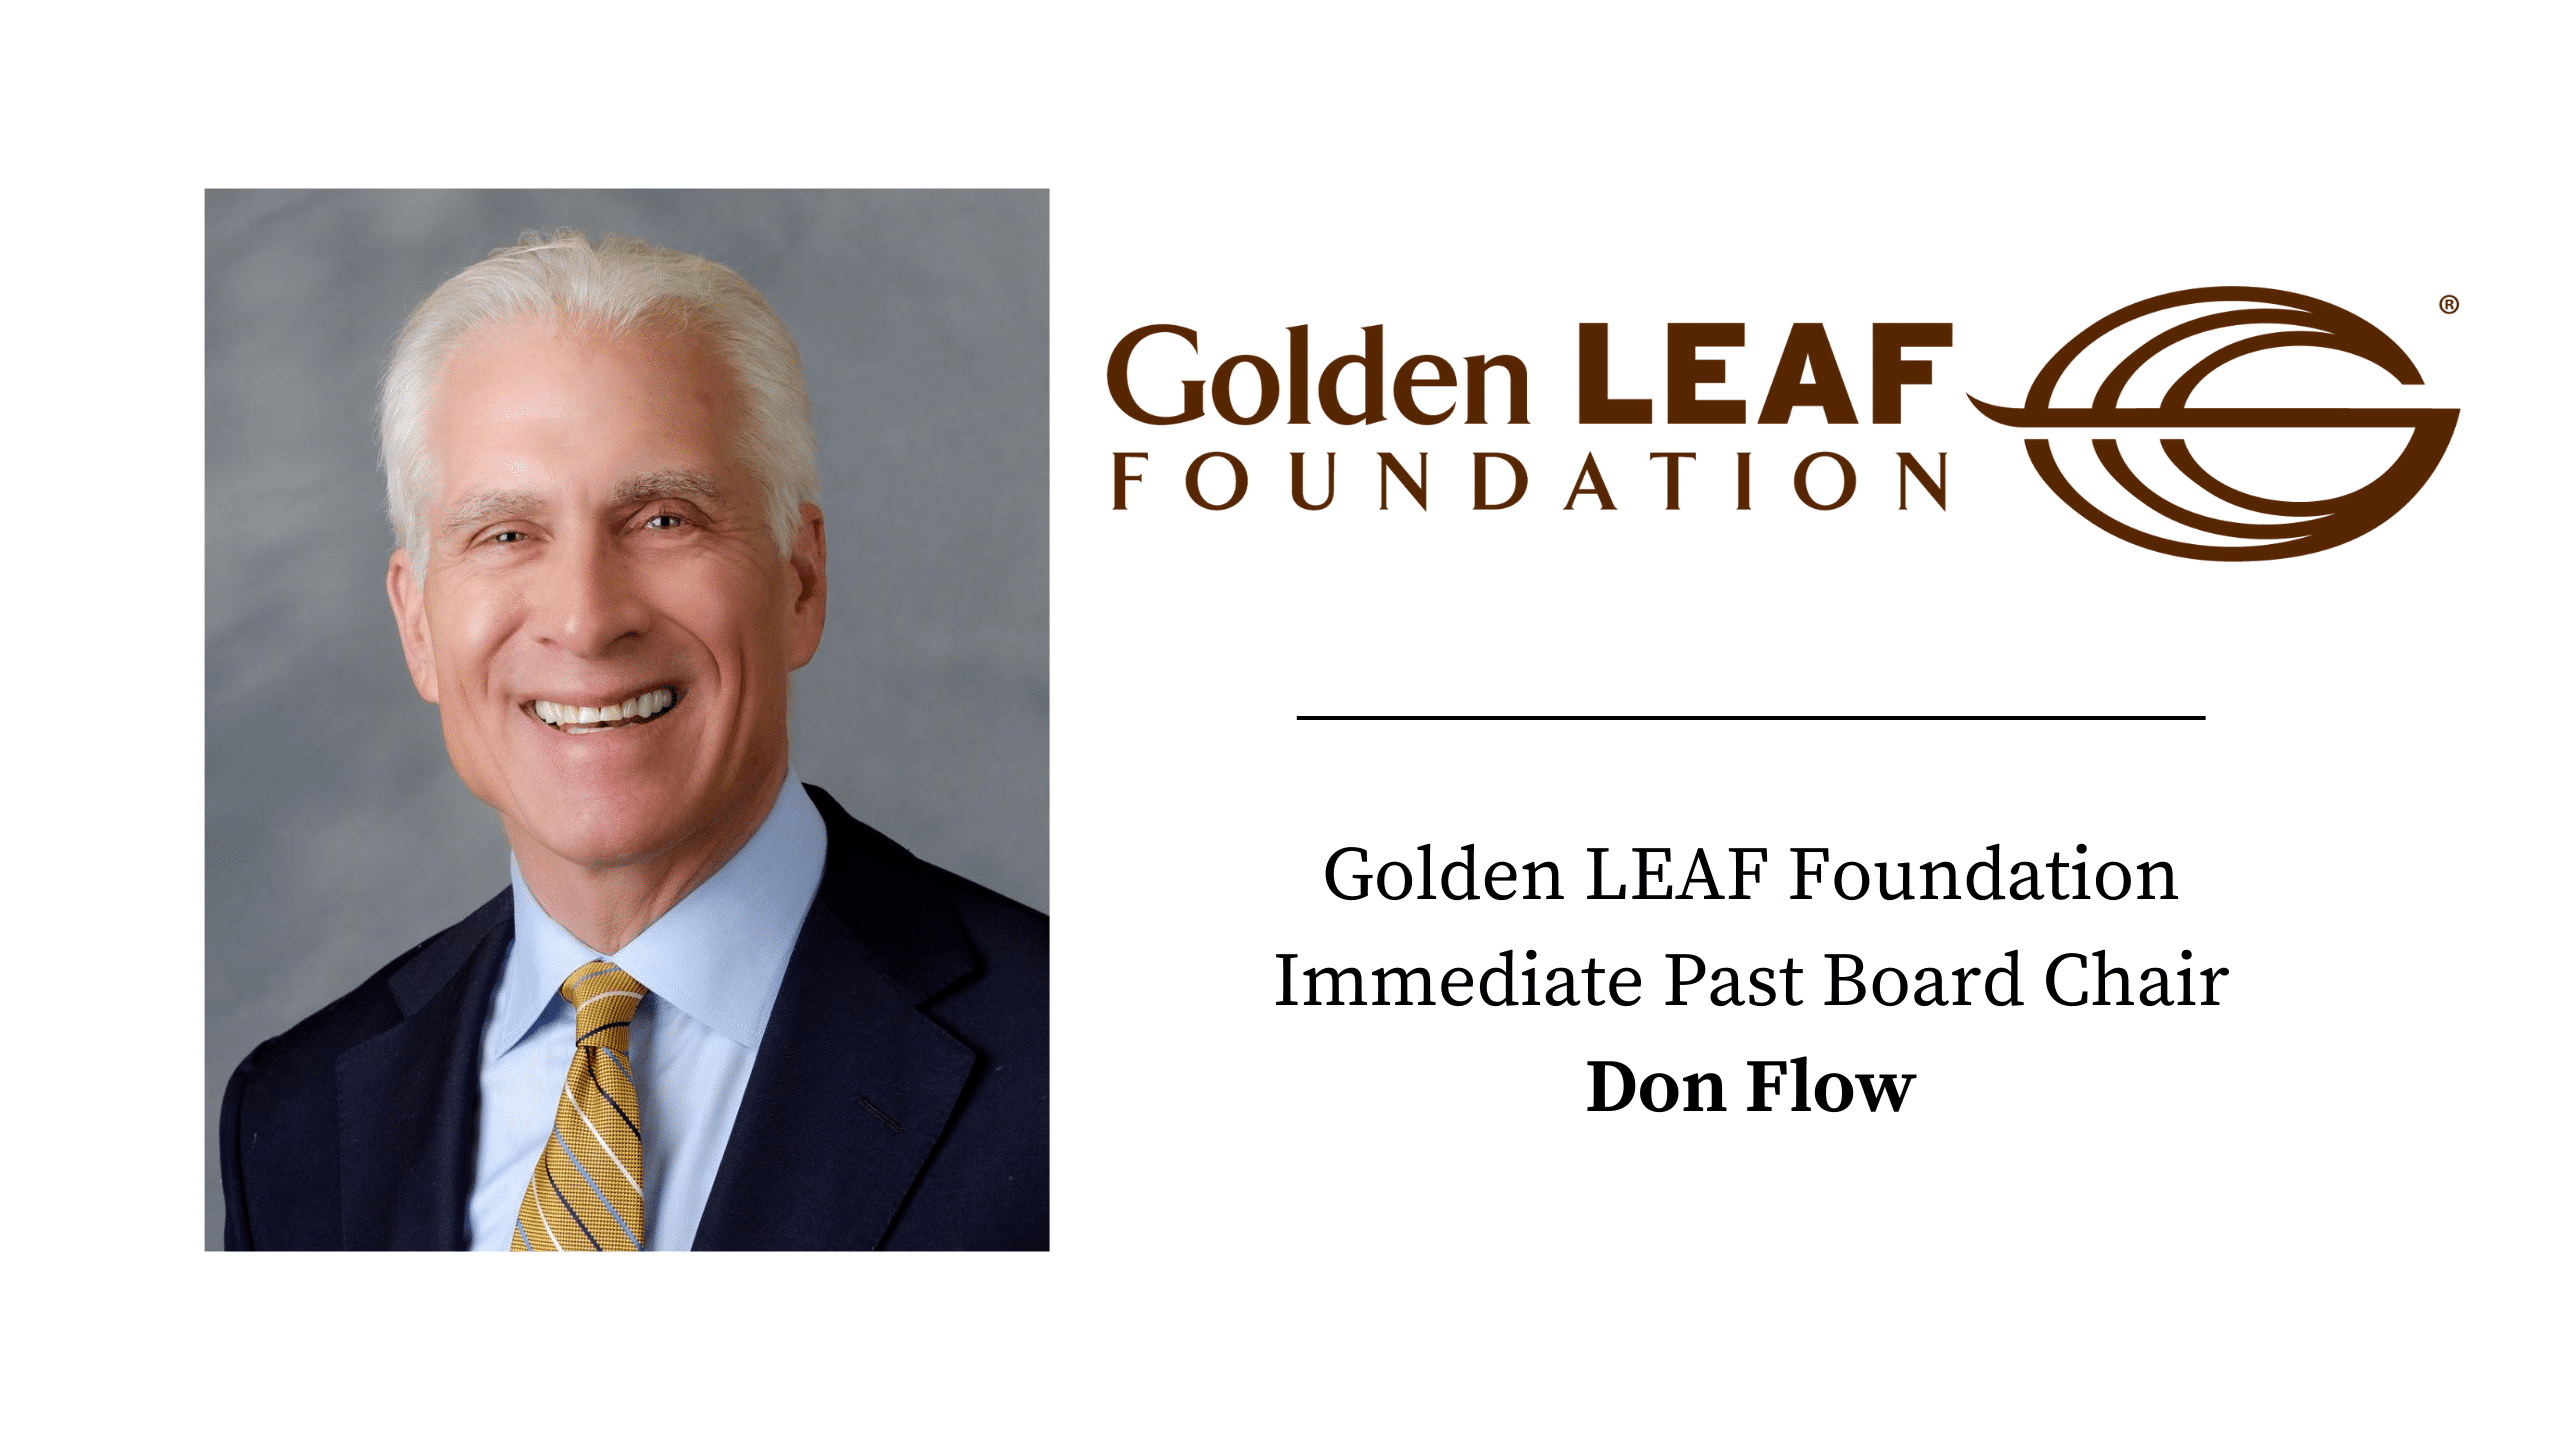 Critical Conversations with Scott T. Hamilton featuring Golden LEAF Foundation’s Immediate Past Board Chair Don Flow